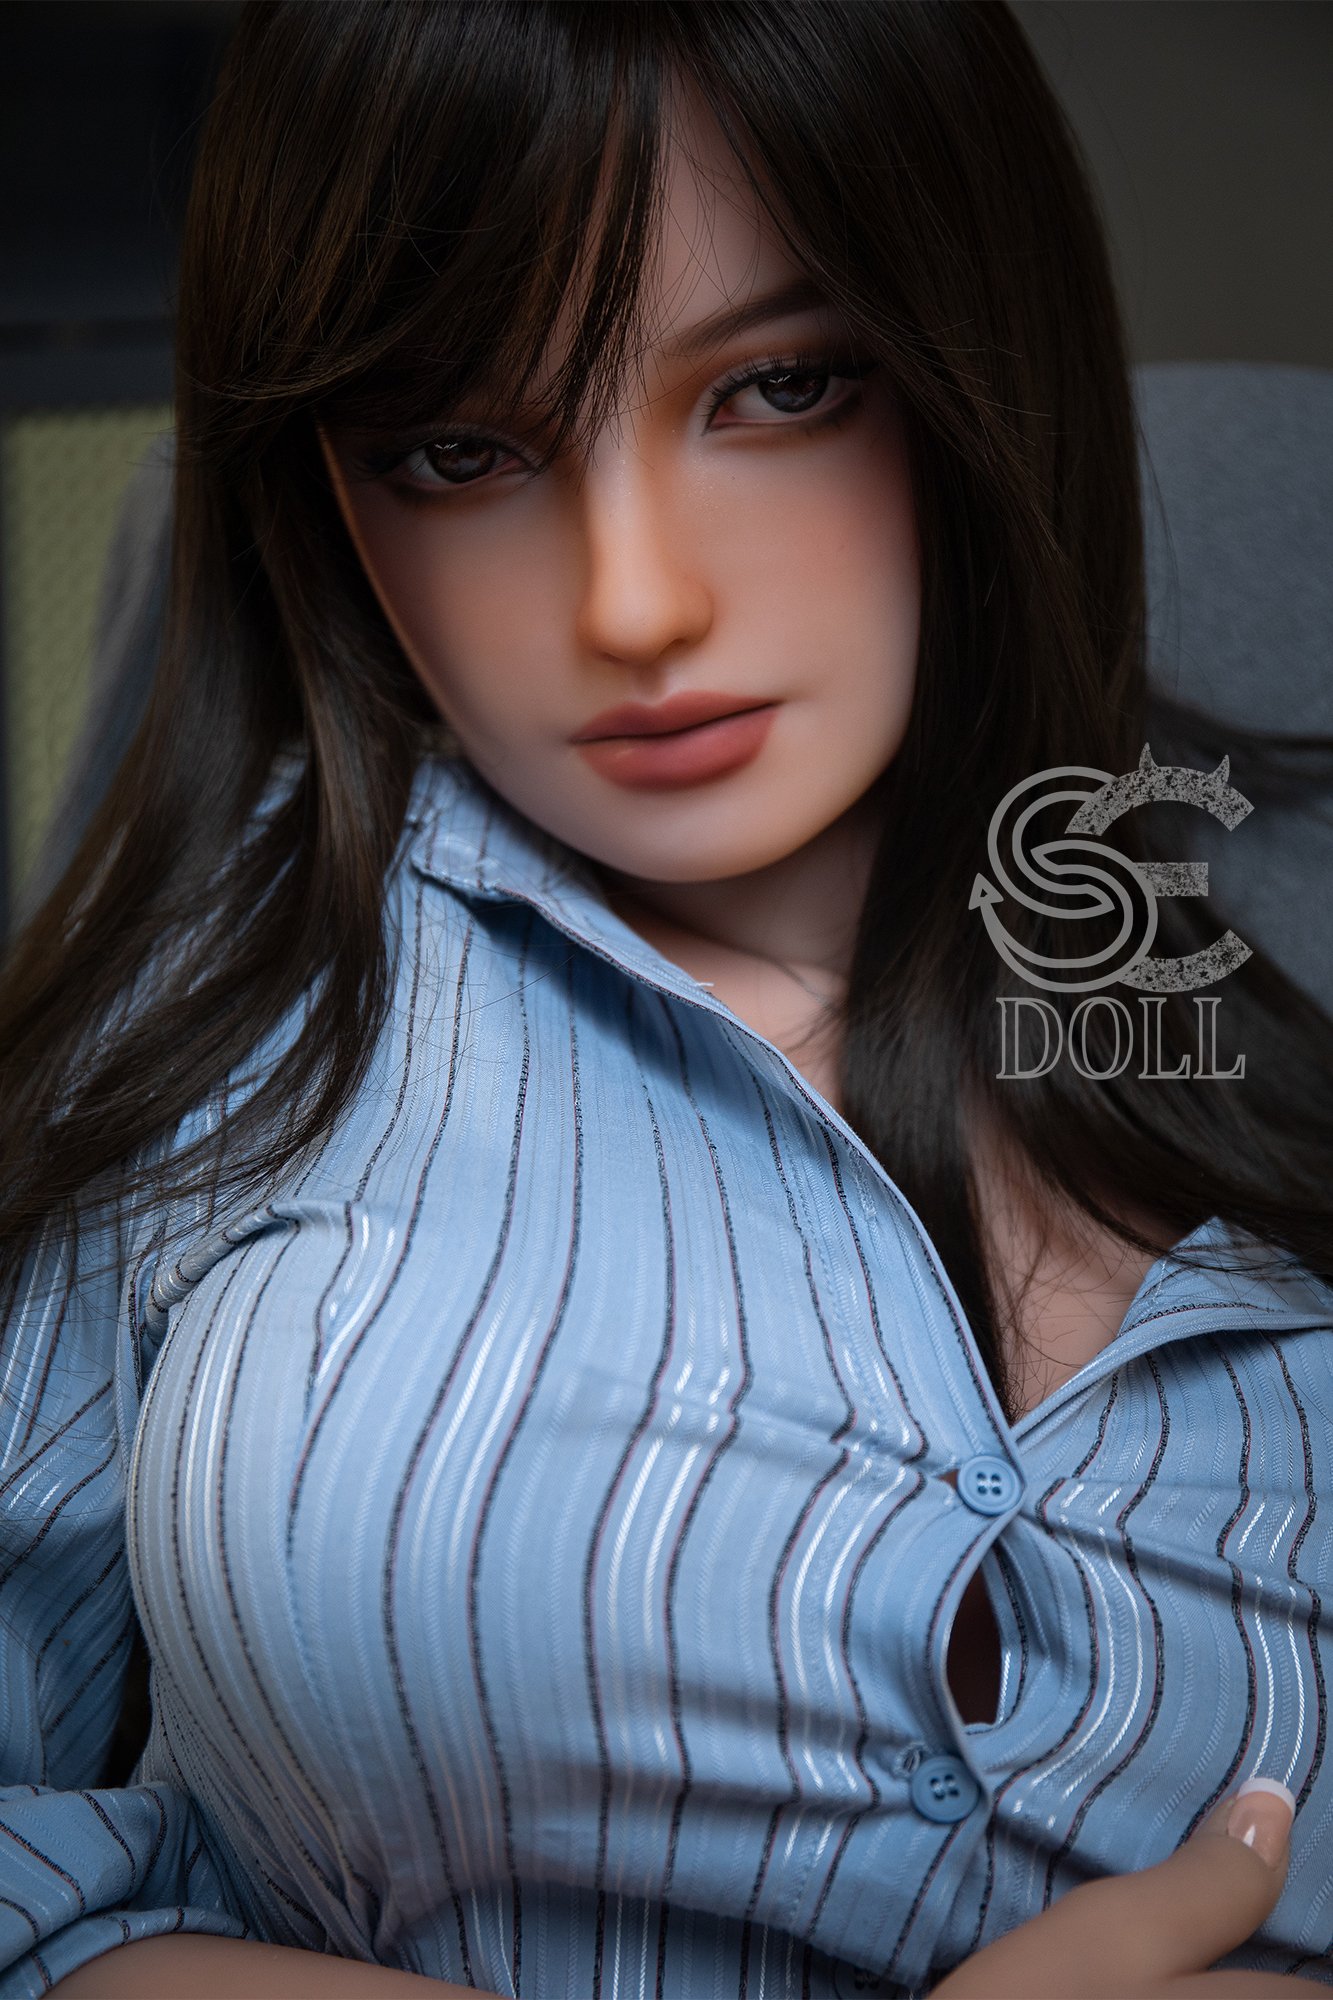 Buy Se Doll Amina 157cm H Sex Doll Now At Cloud Climax We Offer Low Prices And Fast Discreet 